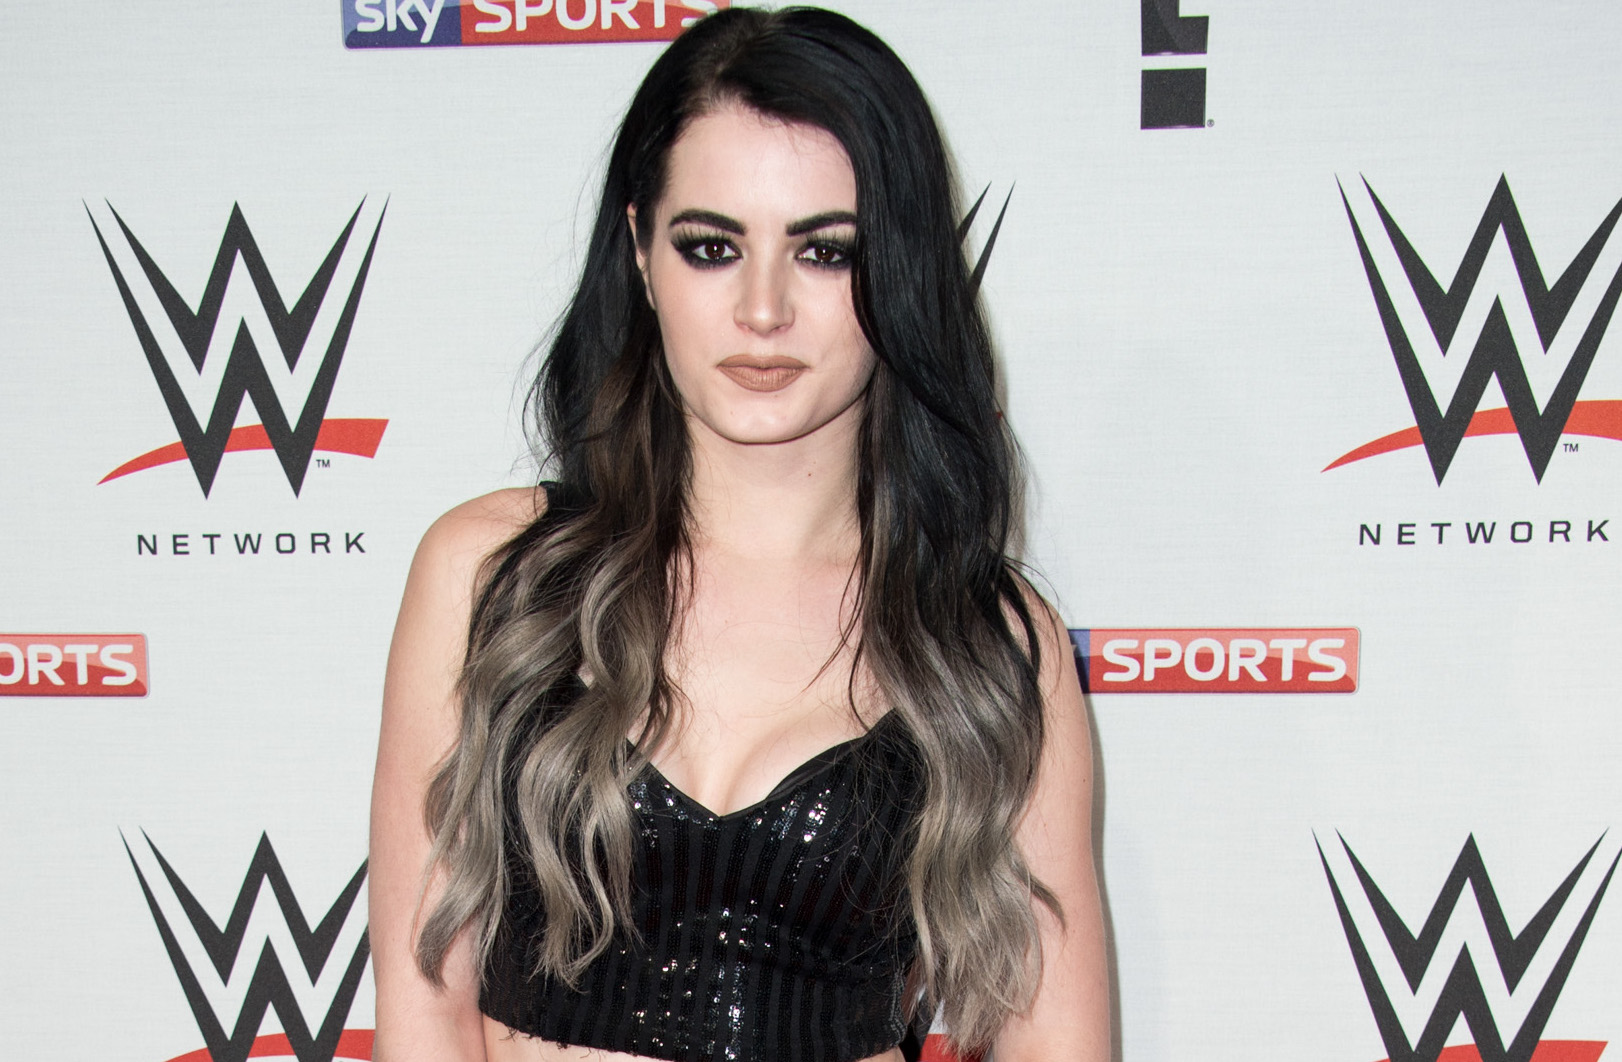 Wwe Star Paige Responds To Her Stolen Nudes And Sex Videos Being Leaked Online Maxim